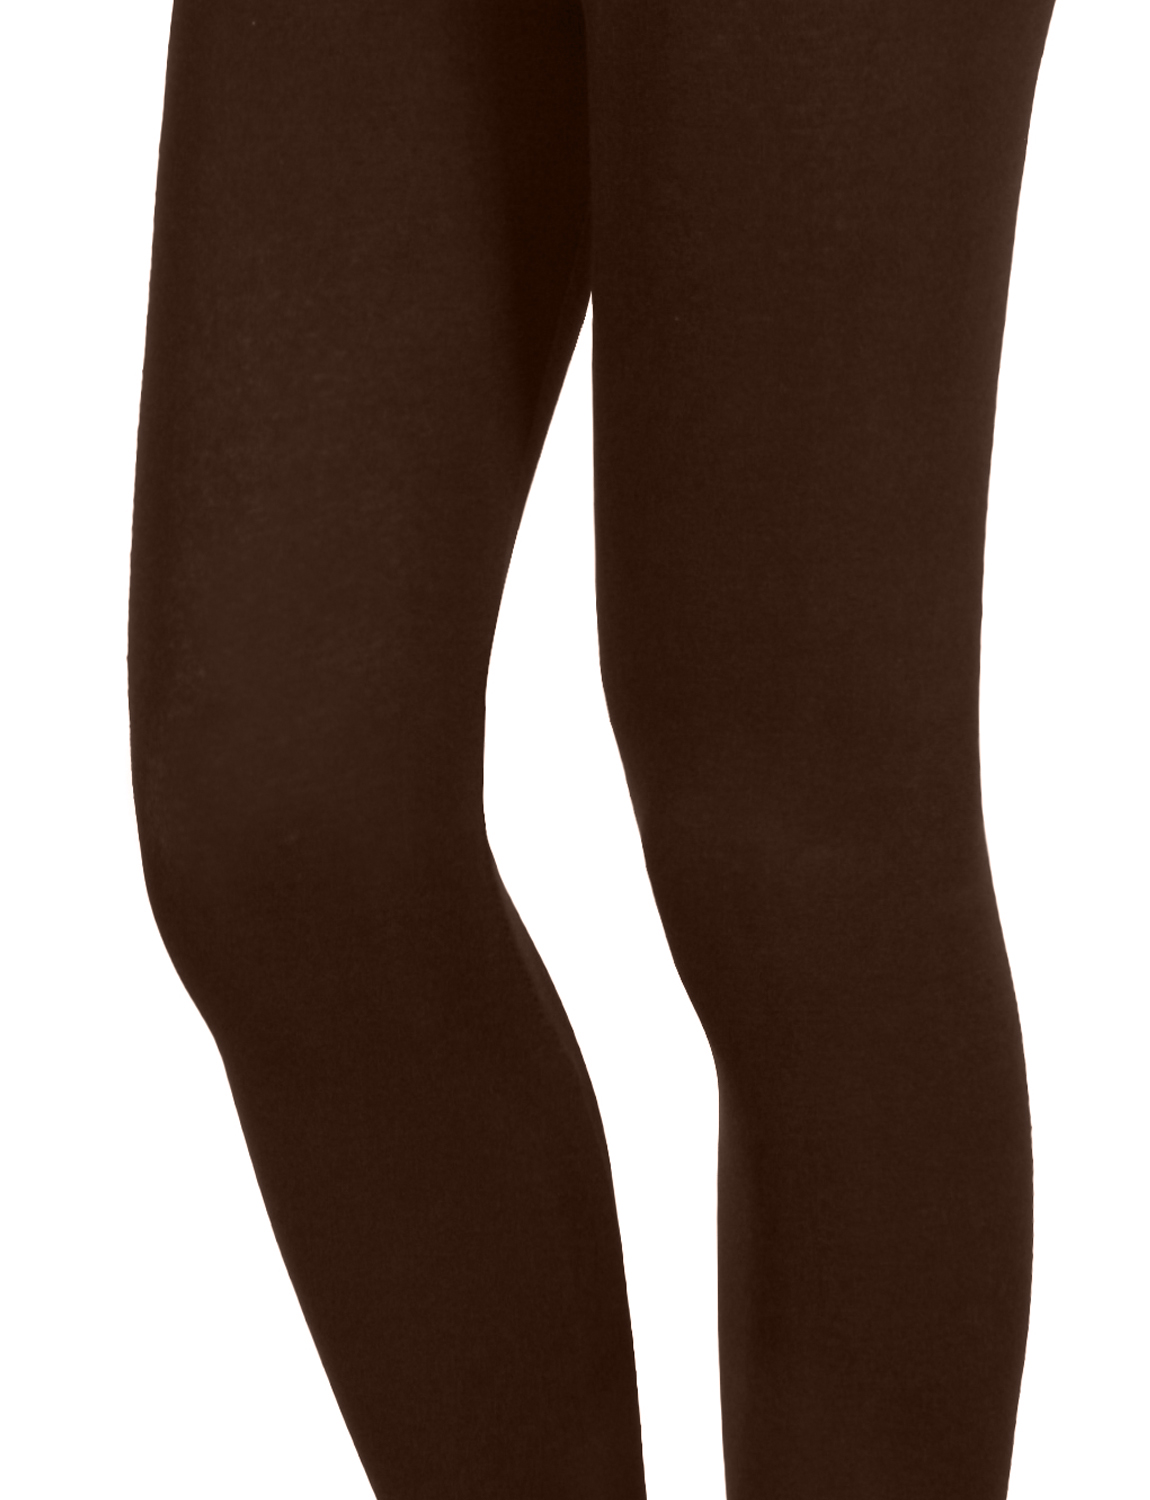 What Looks Good With Brown Leggings Wholesale